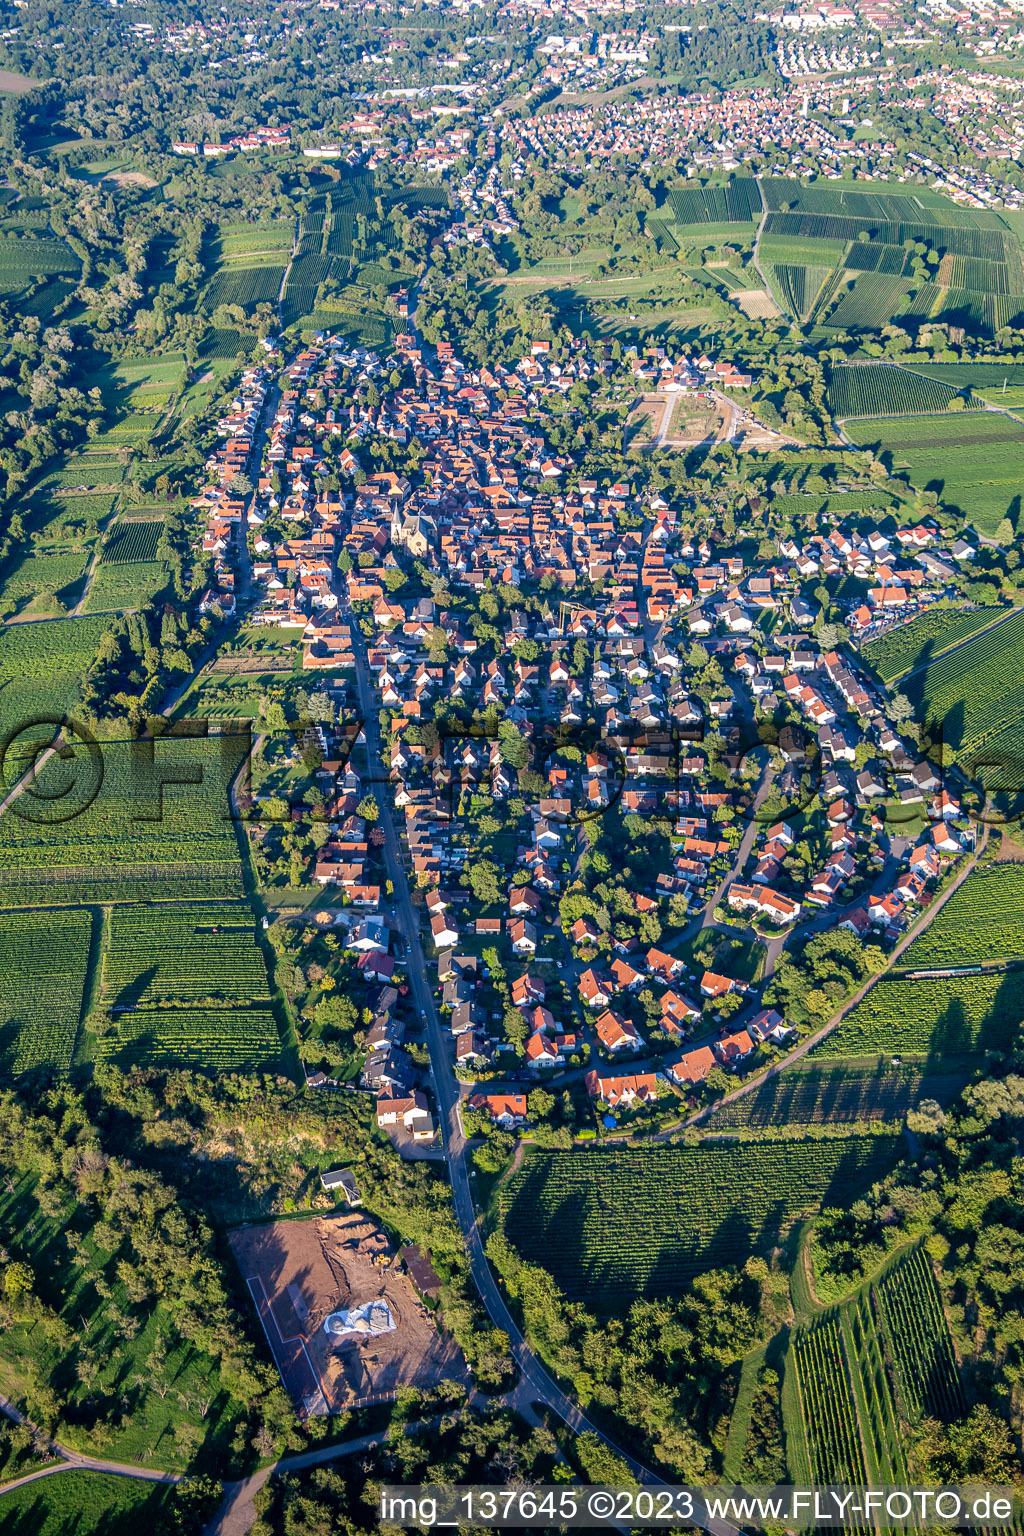 Aerial view of From the west in the district Arzheim in Landau in der Pfalz in the state Rhineland-Palatinate, Germany